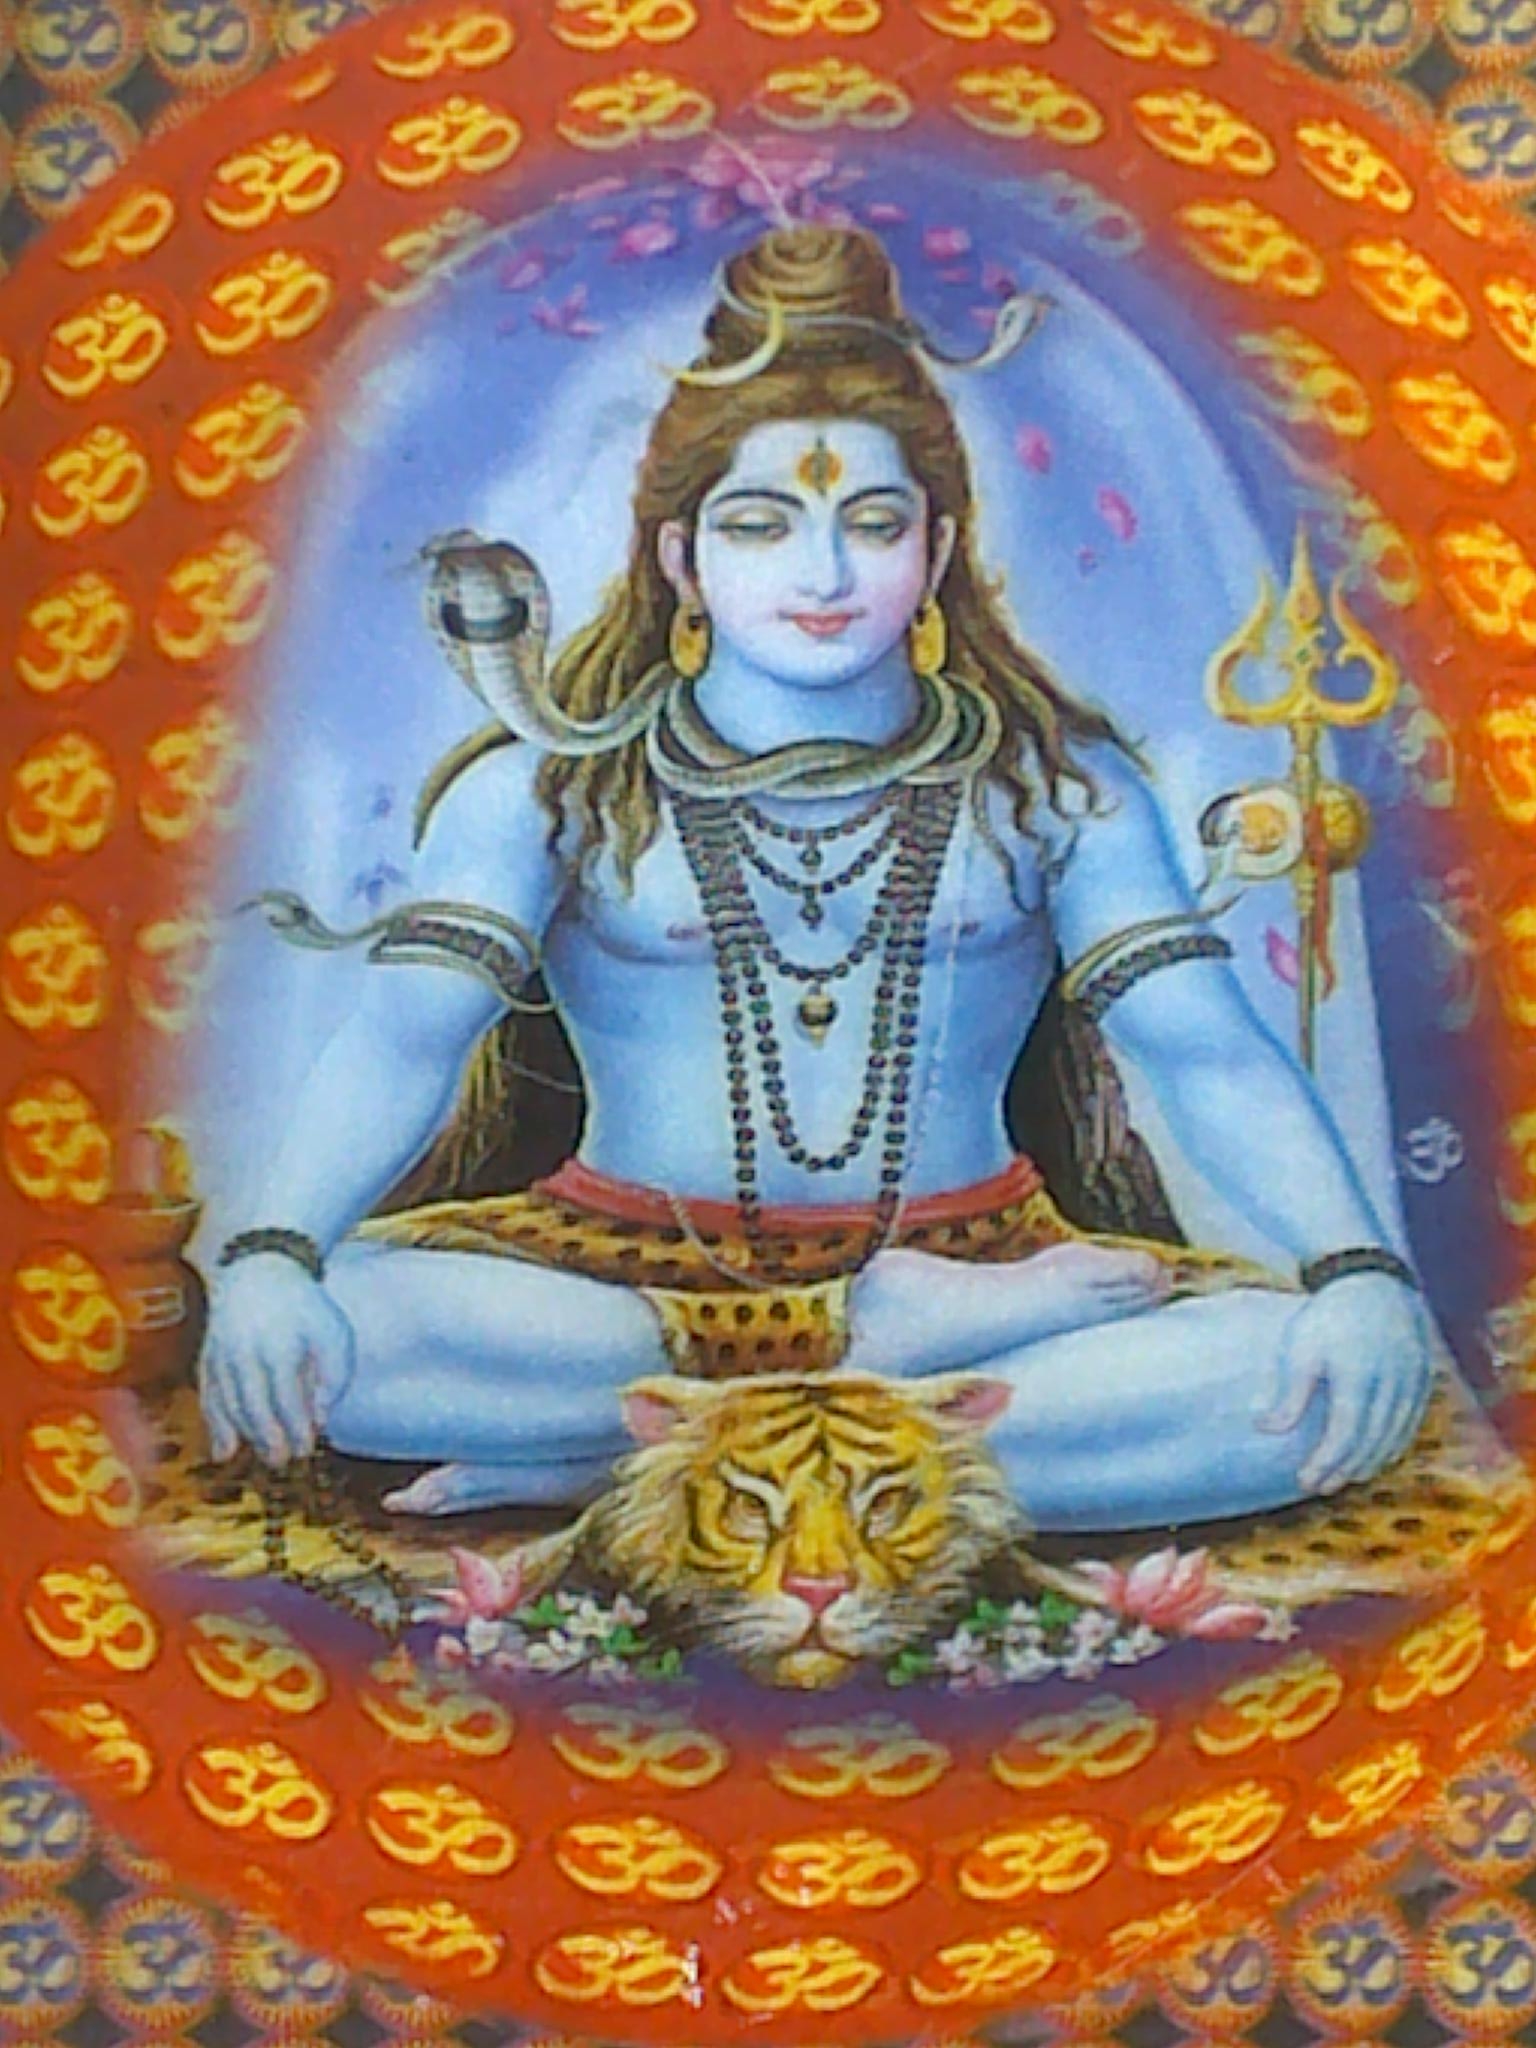 To whom did Shiva first reveal the science of yoga? - Quora